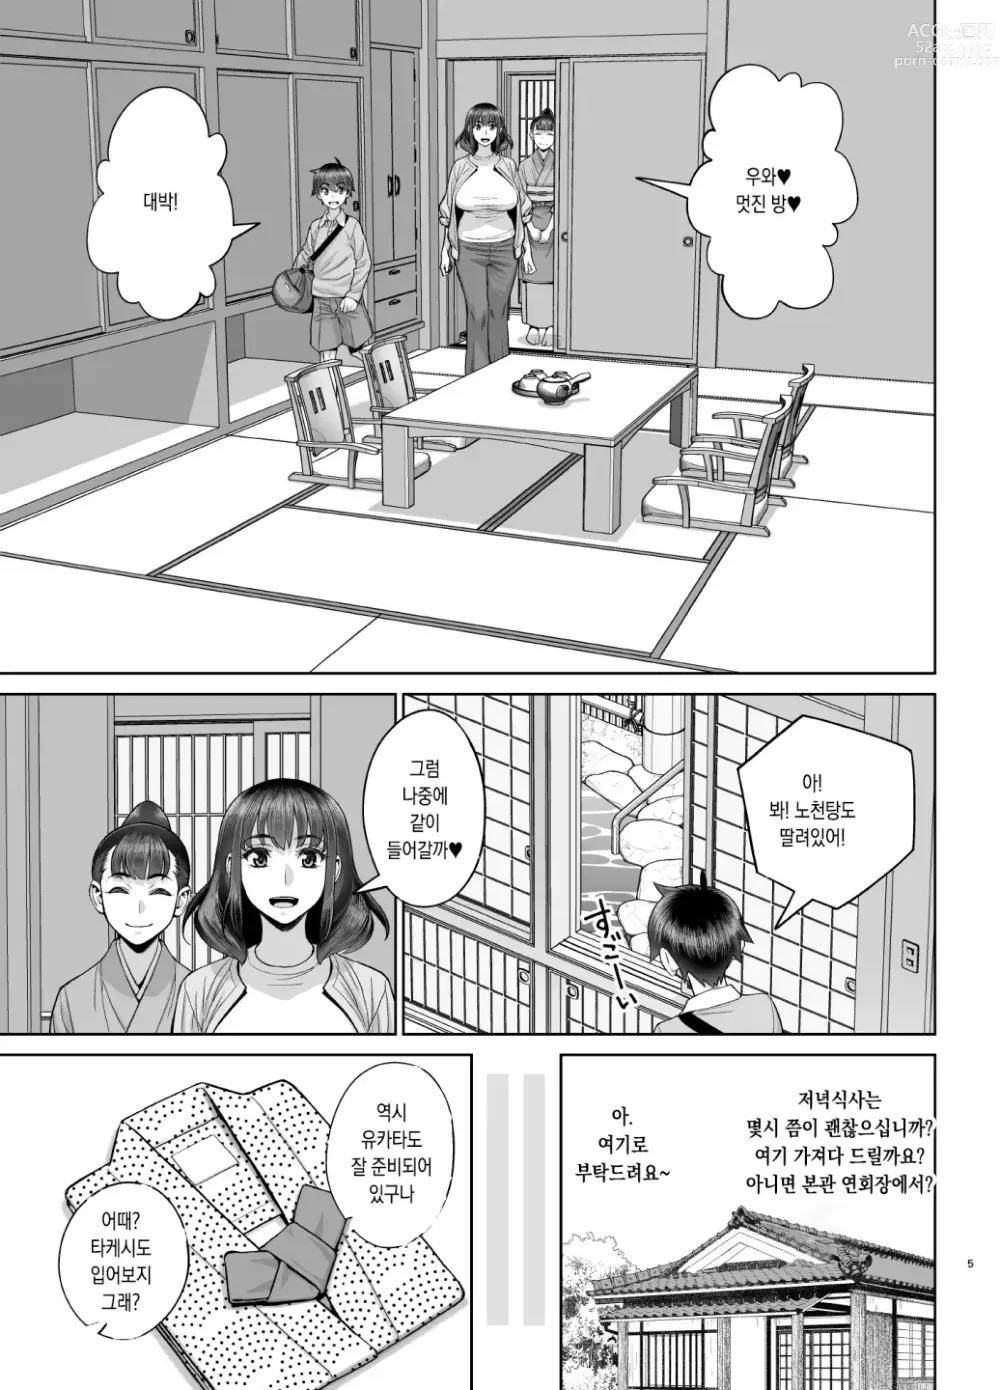 Page 5 of doujinshi 첫숙박 섹스